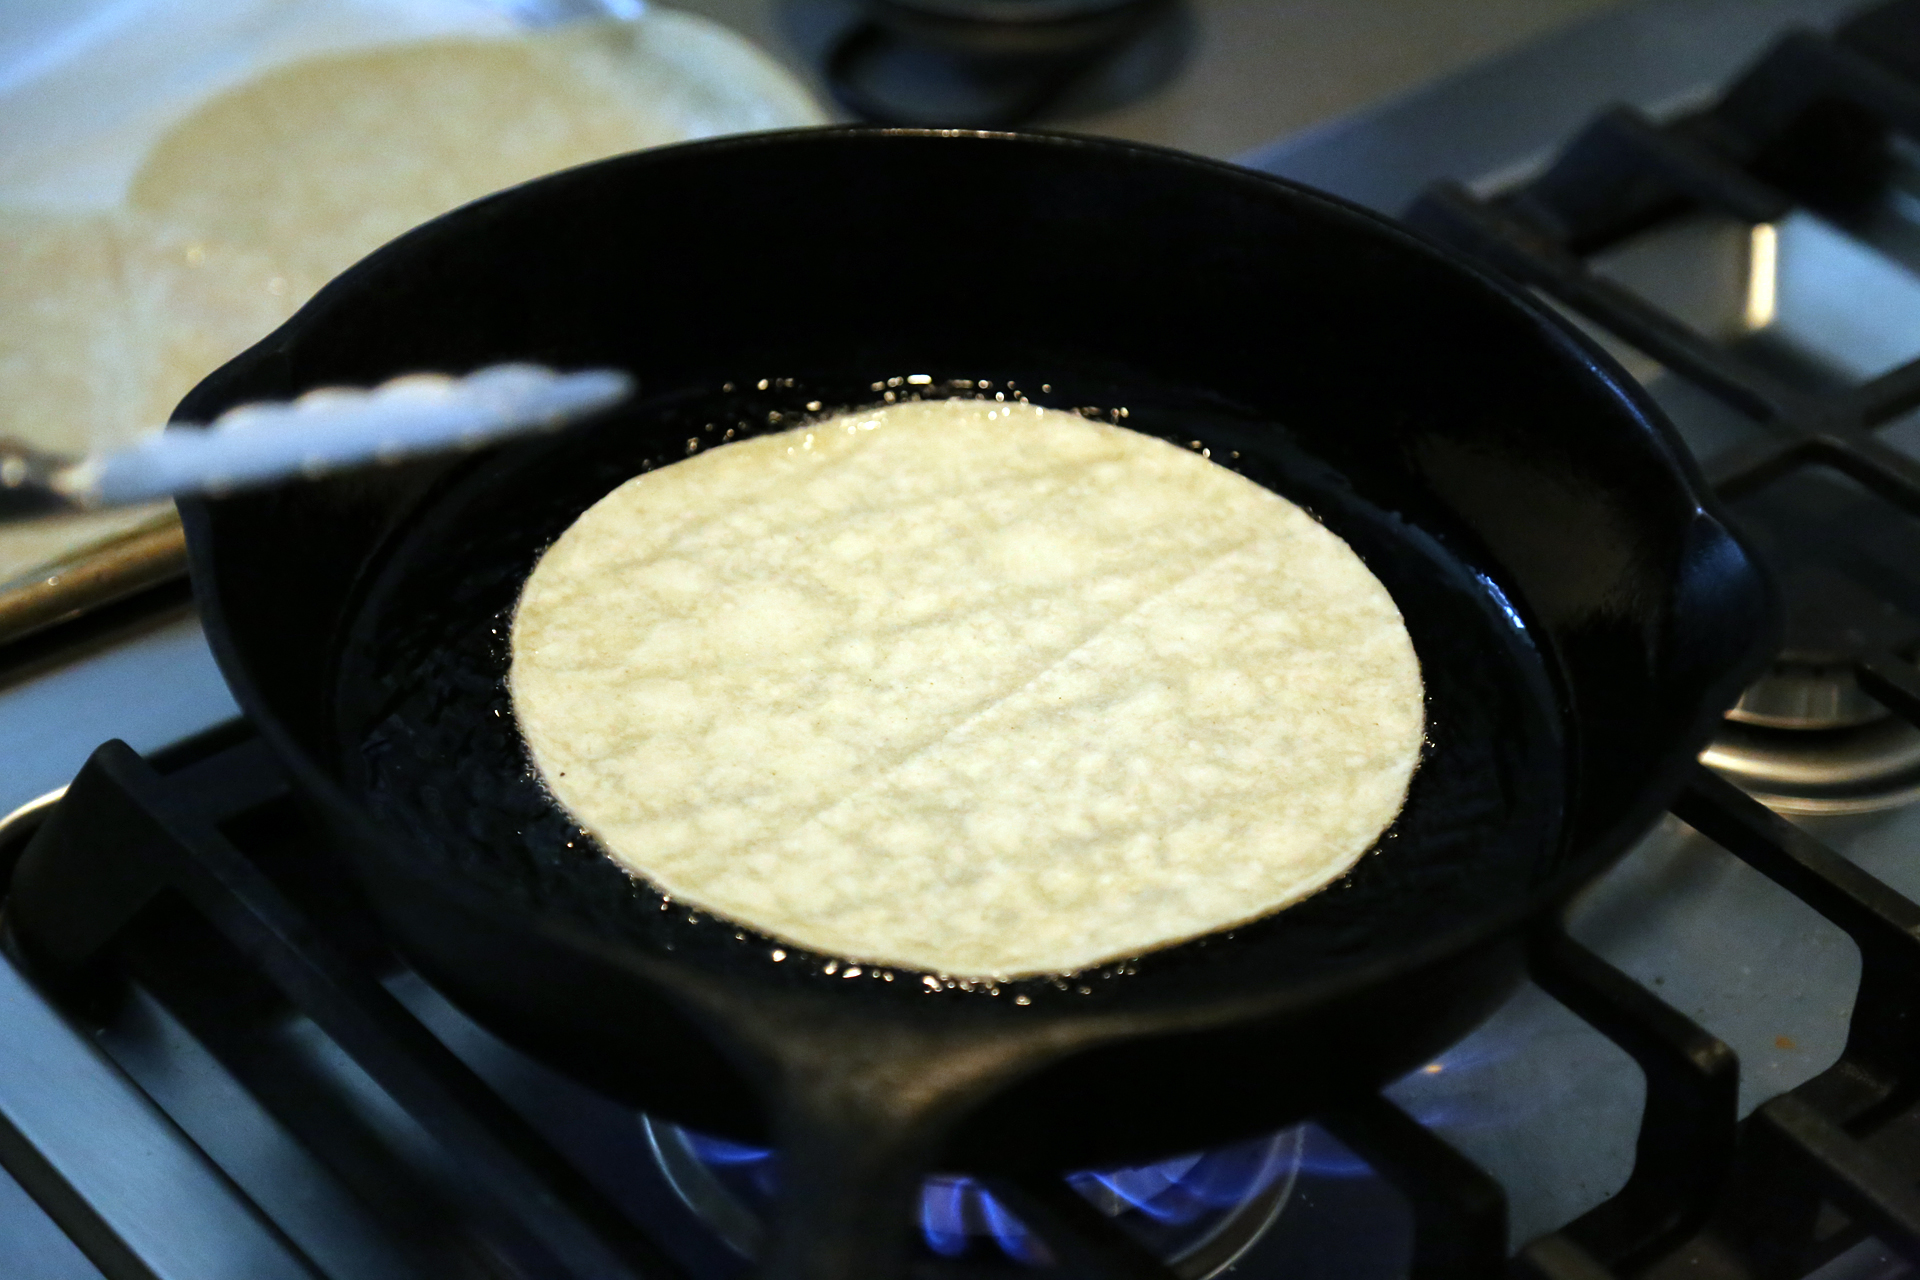 Fry the tortillas, turning them after a few seconds.